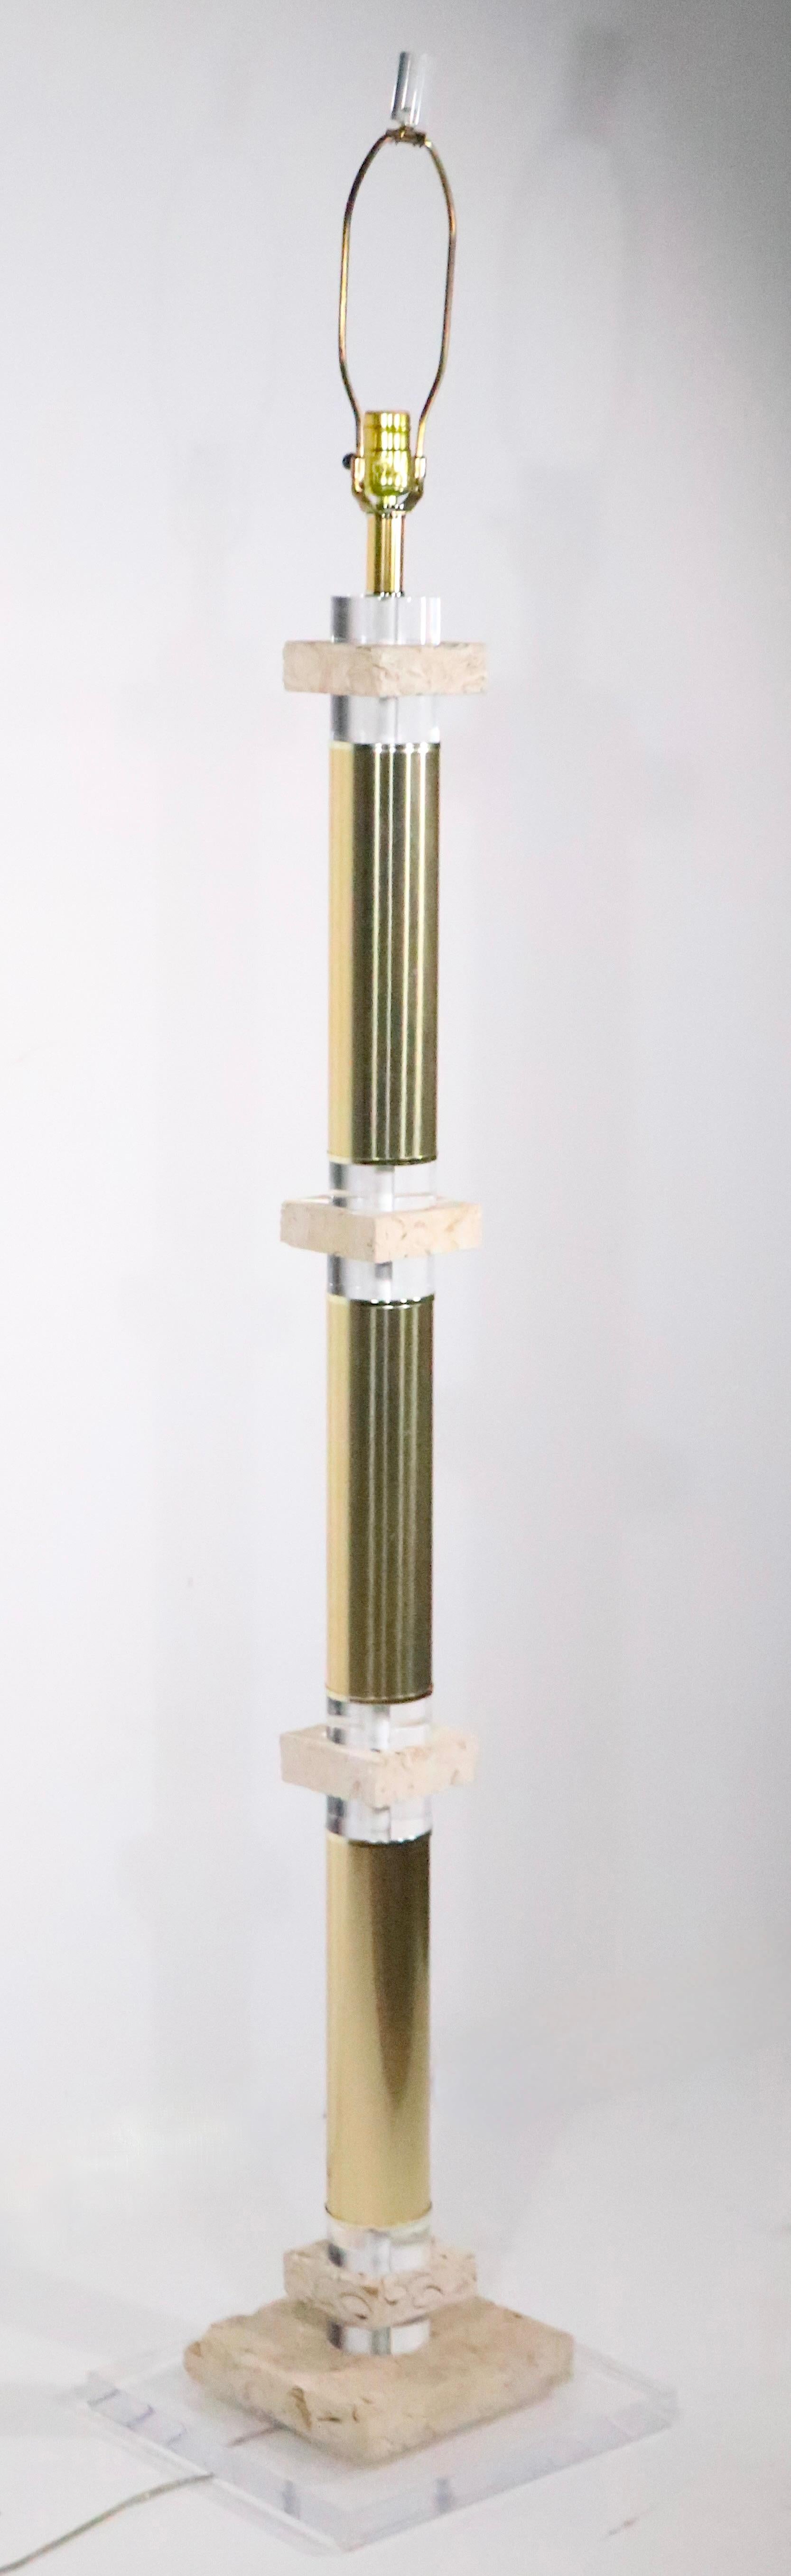 Exceptional Hollywood Florida Regency style floor lamp constructed of tubular brass with cast lucite and fossilized stone spacers. The lamp is in very fine, original, working,  clean and ready to use condition. The lamp retains it's original shade,